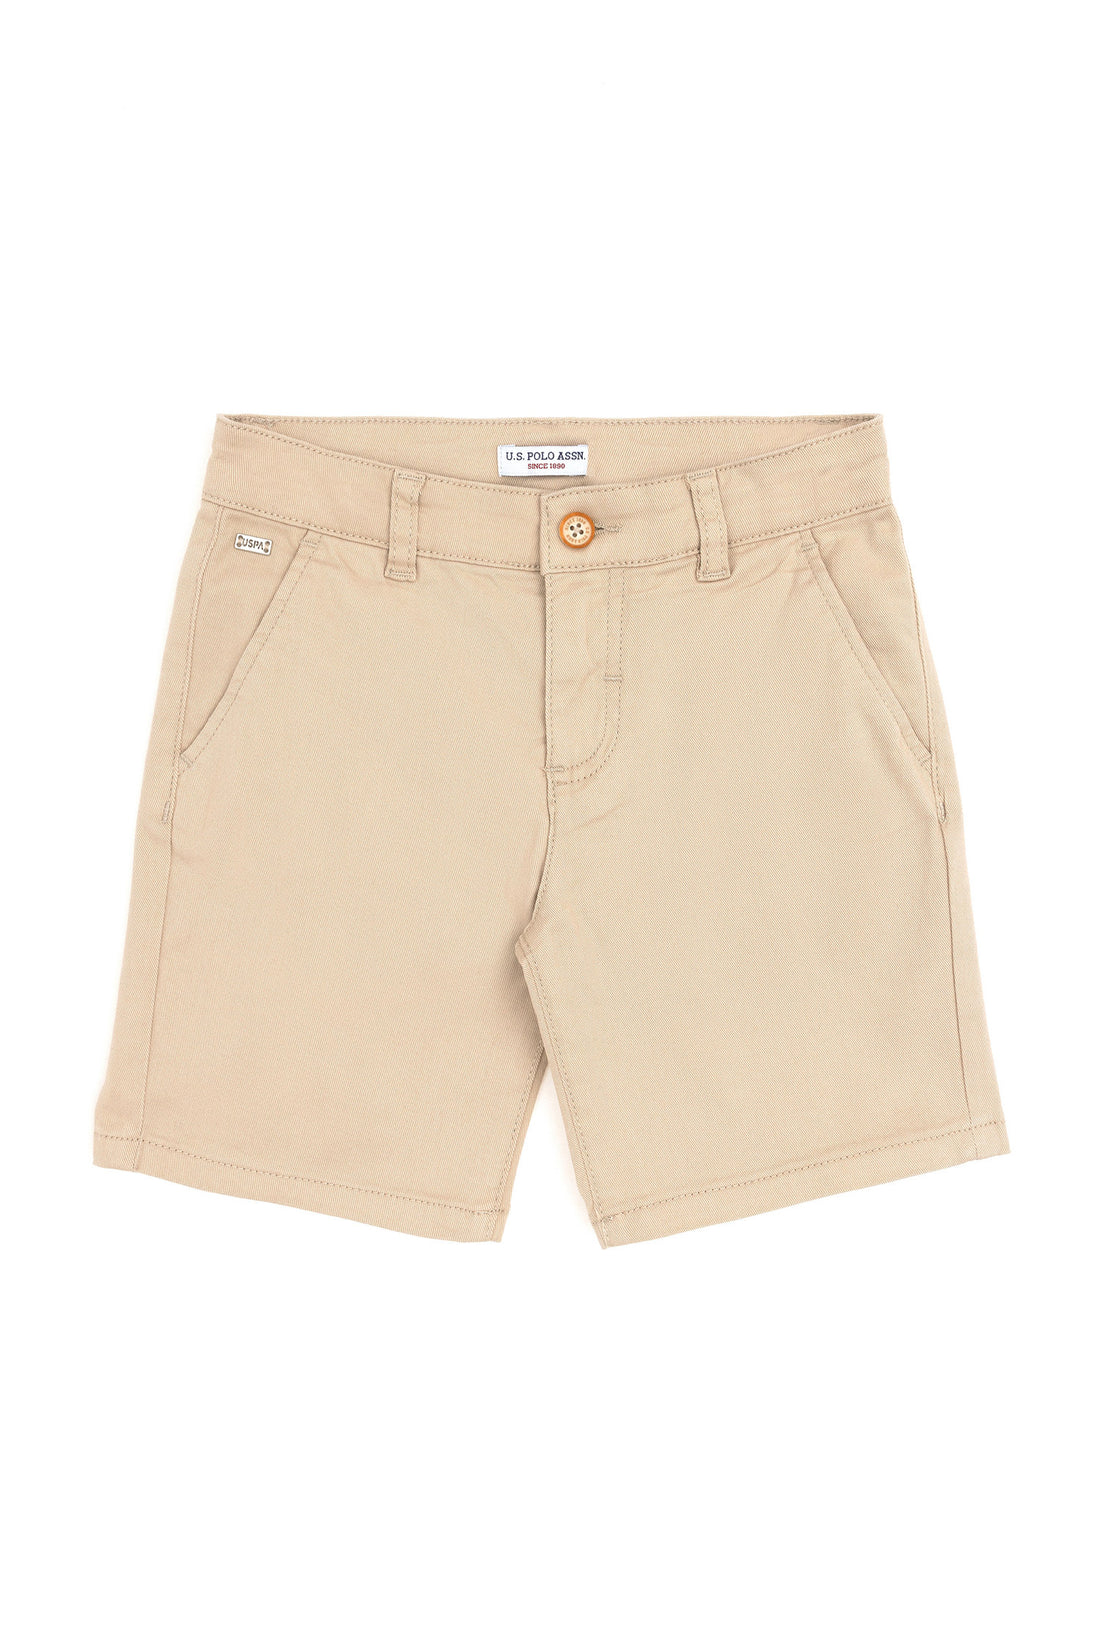 Fitted Chino Shorts_G083GL0310 1829783_VR049_02